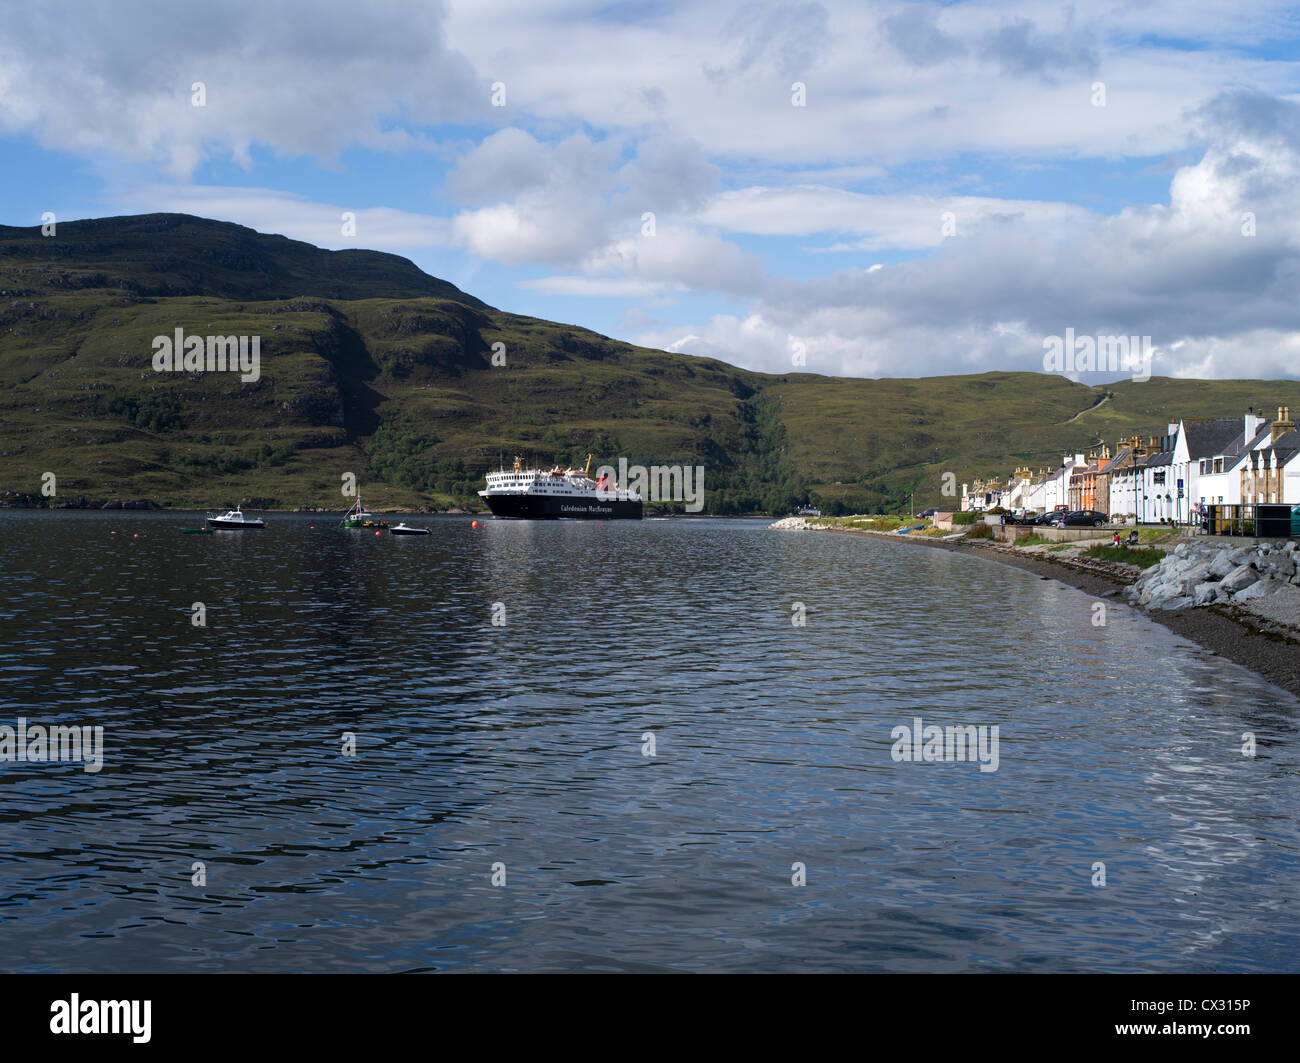 dh Loch Broom scotland ULLAPOOL ROSS CROMARTY Calmac Outer Herbrides island ferry seafront Ullapool houses highlands sailing boat Stock Photo